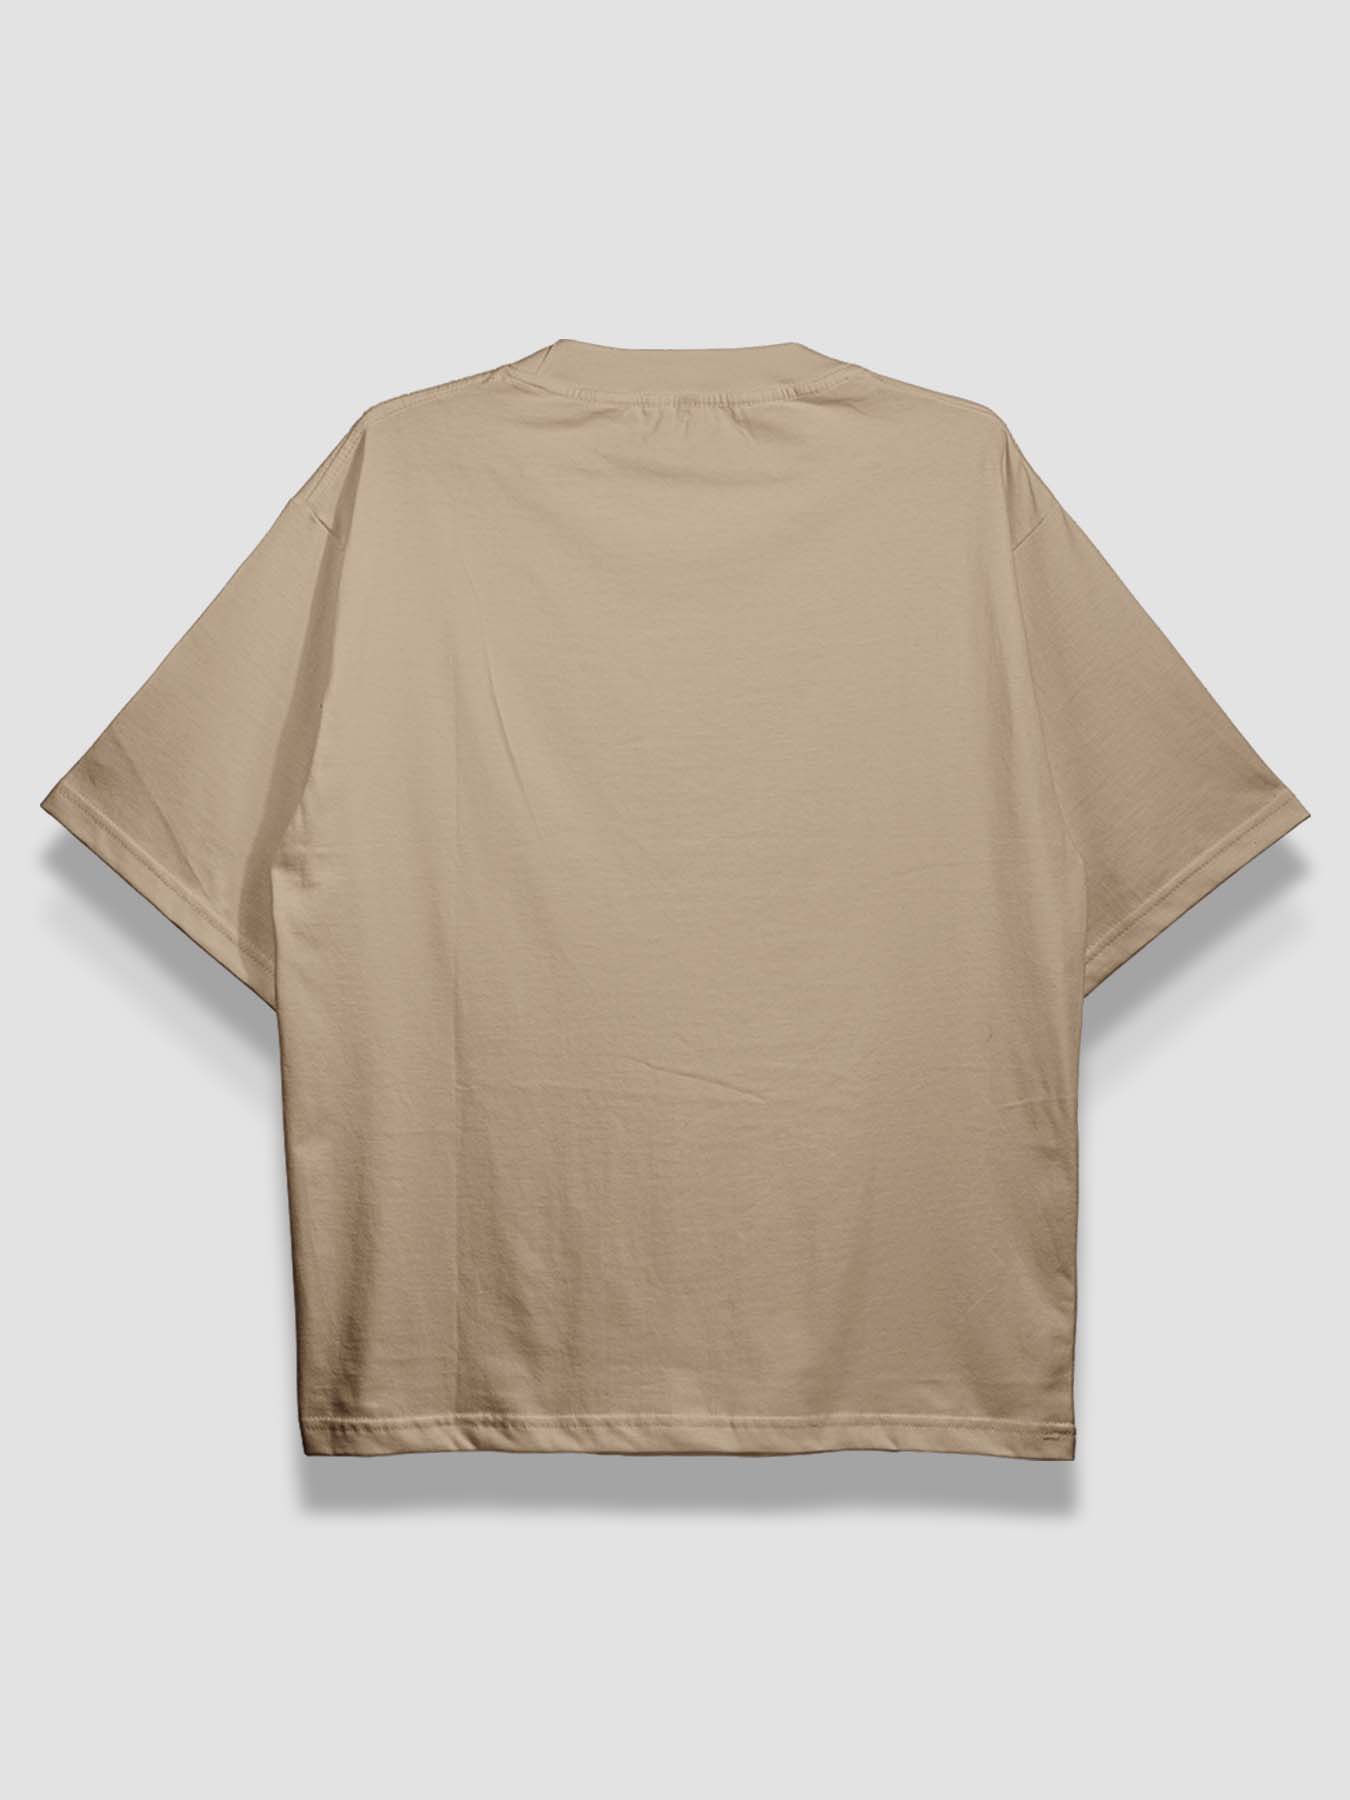 Urban Fit Oversized Essential T-shirt - Sand - keos.life